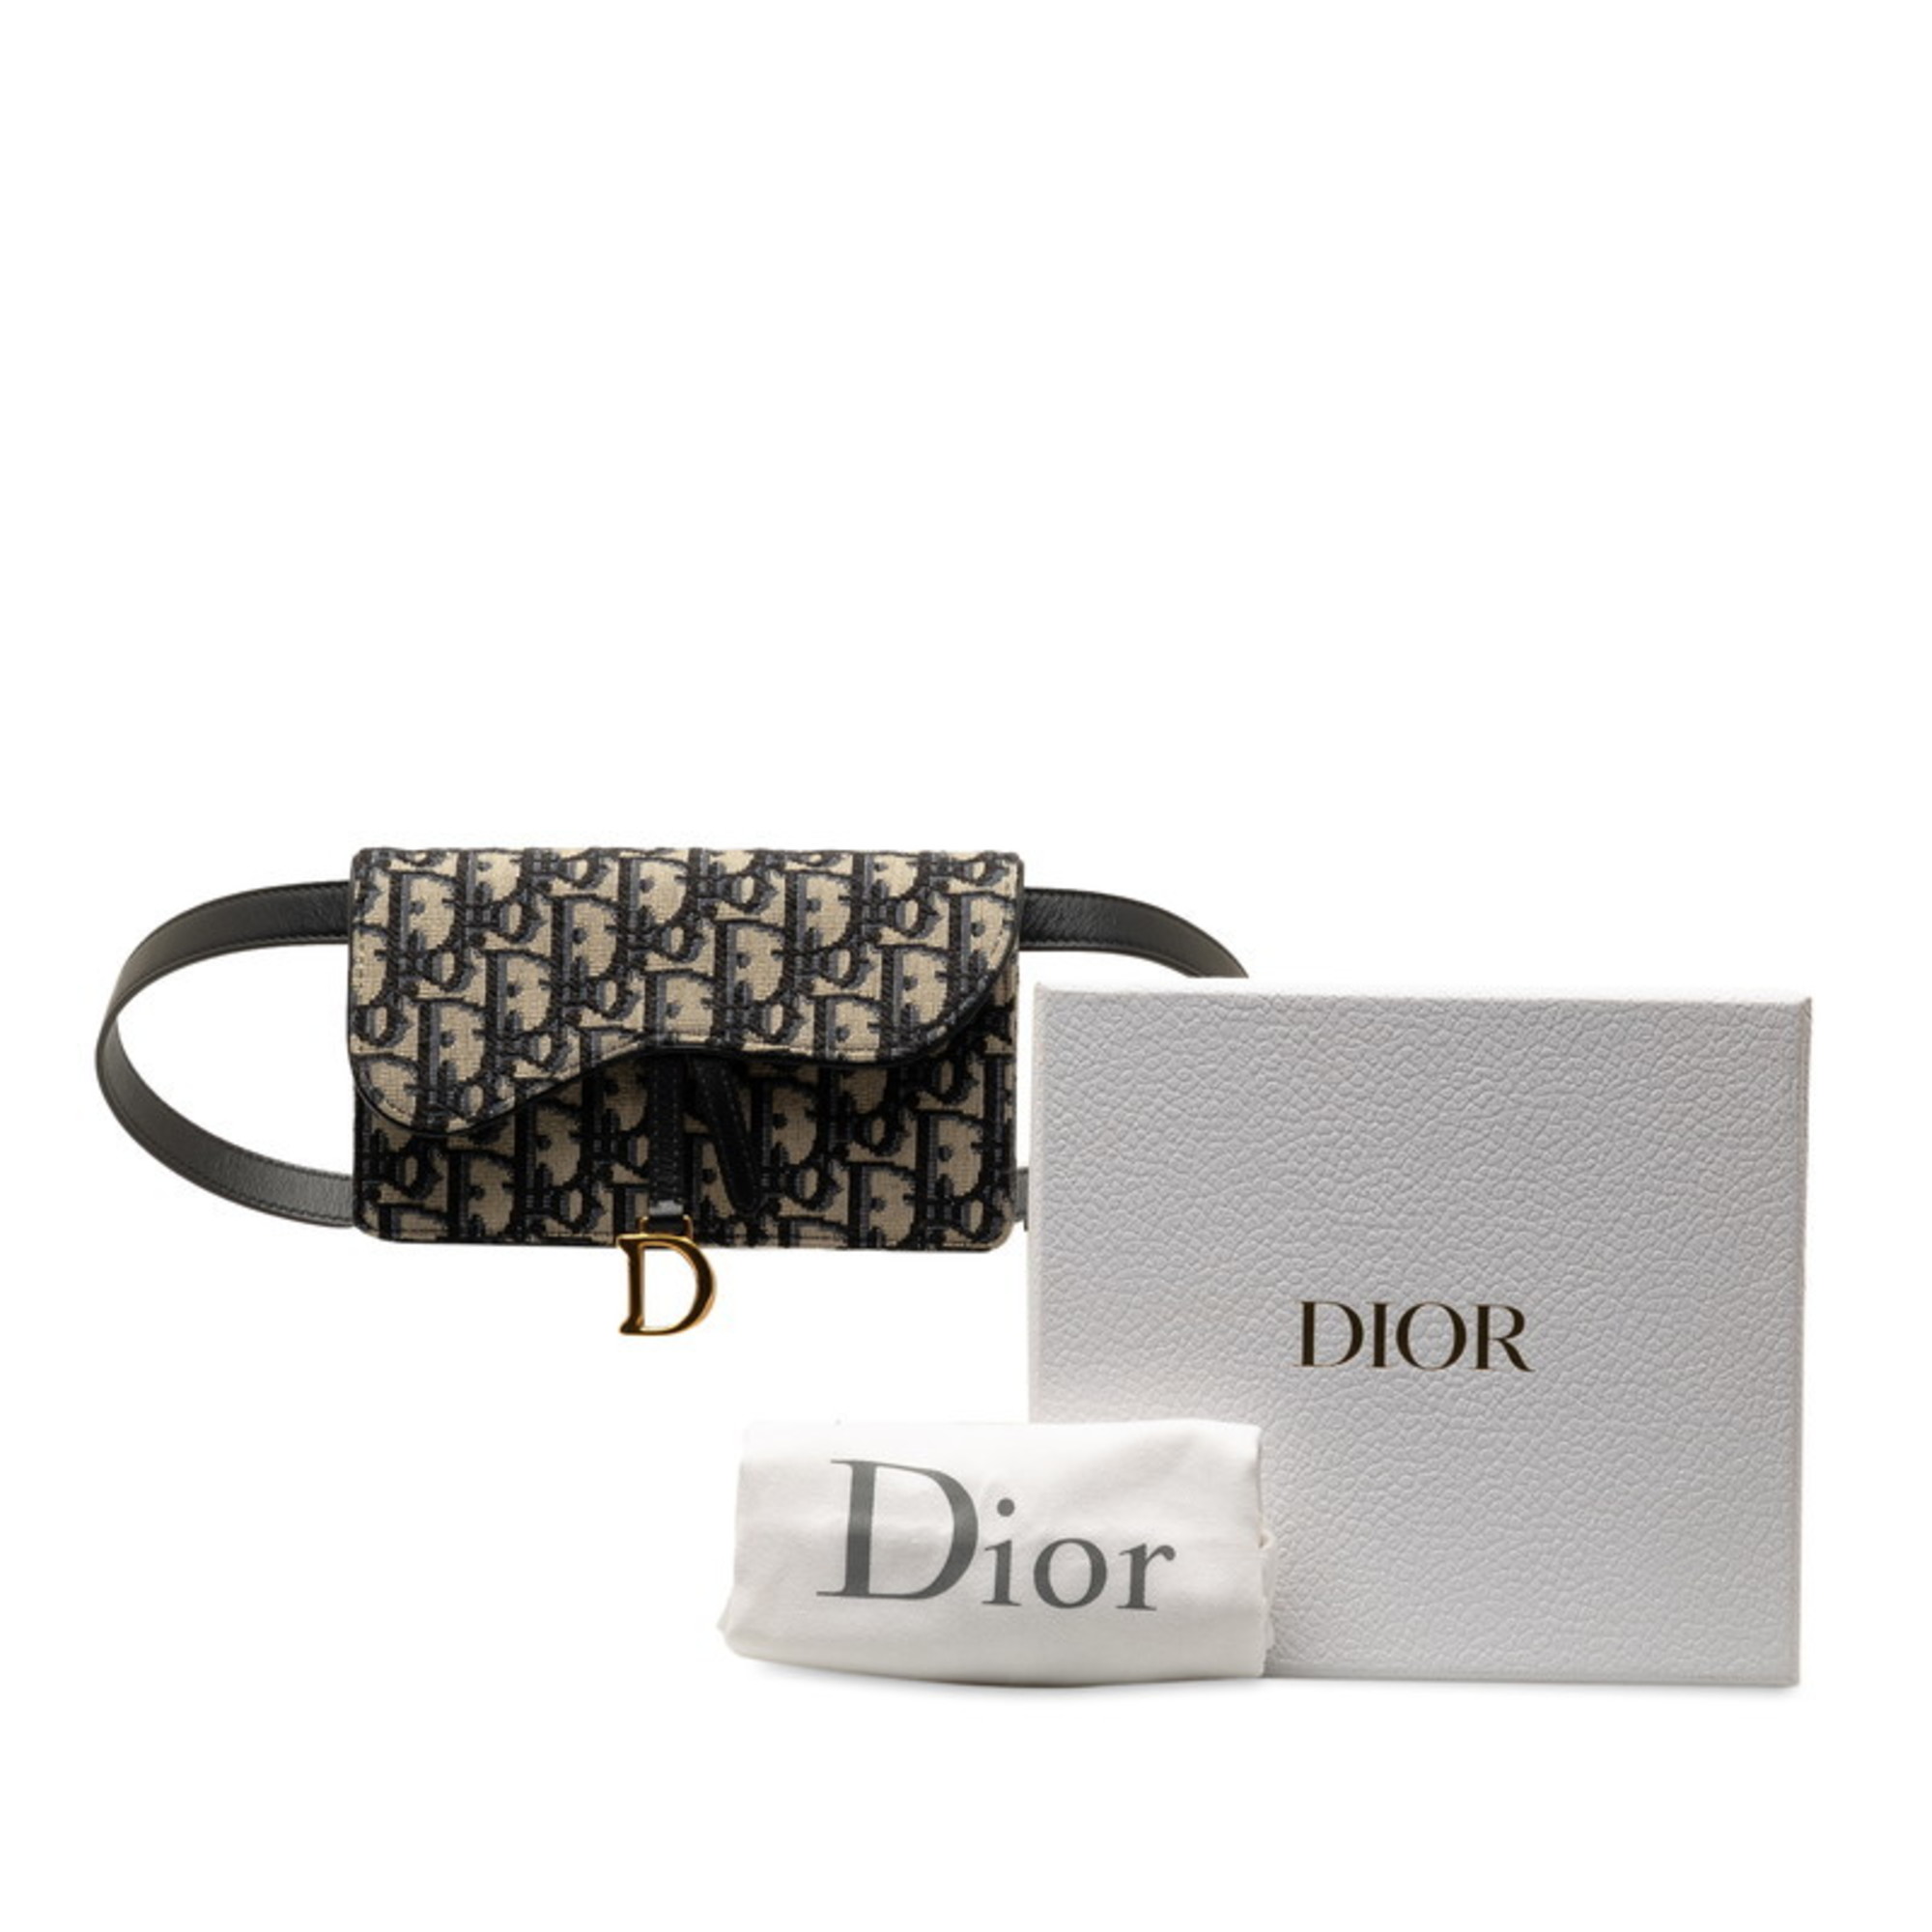 Christian Dior Dior Trotter Saddle Belt Pouch Bag S5619CTZQ Navy Canvas Leather Women's